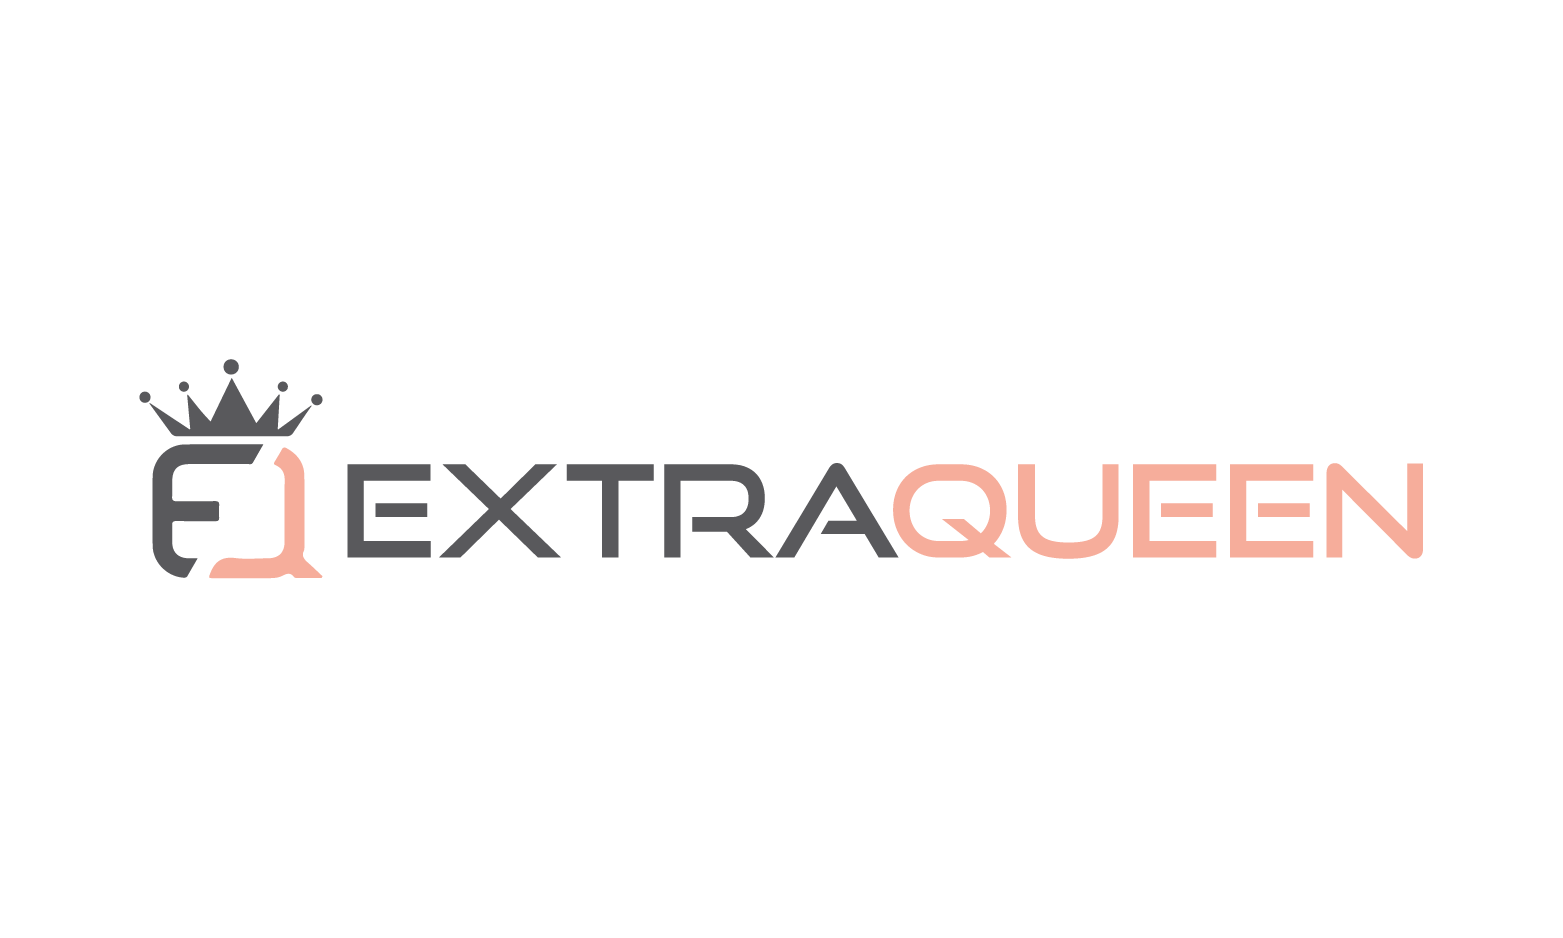 ExtraQueen.com - Creative brandable domain for sale